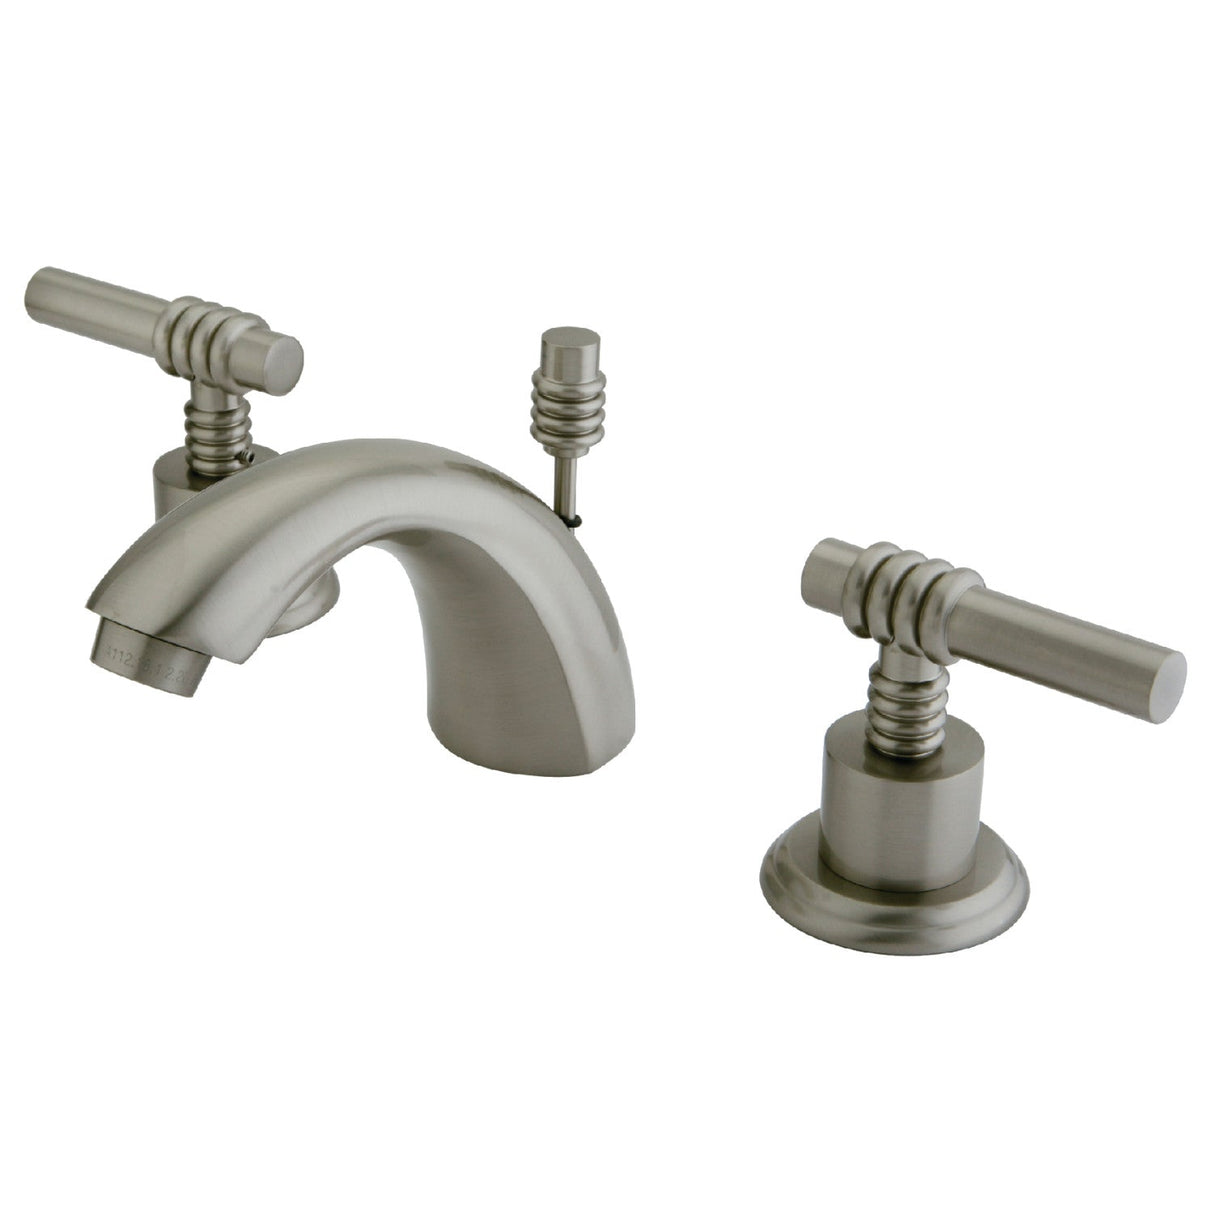 KS2958ML Two-Handle 3-Hole Deck Mount Mini-Widespread Bathroom Faucet with Brass Pop-Up, Brushed Nickel